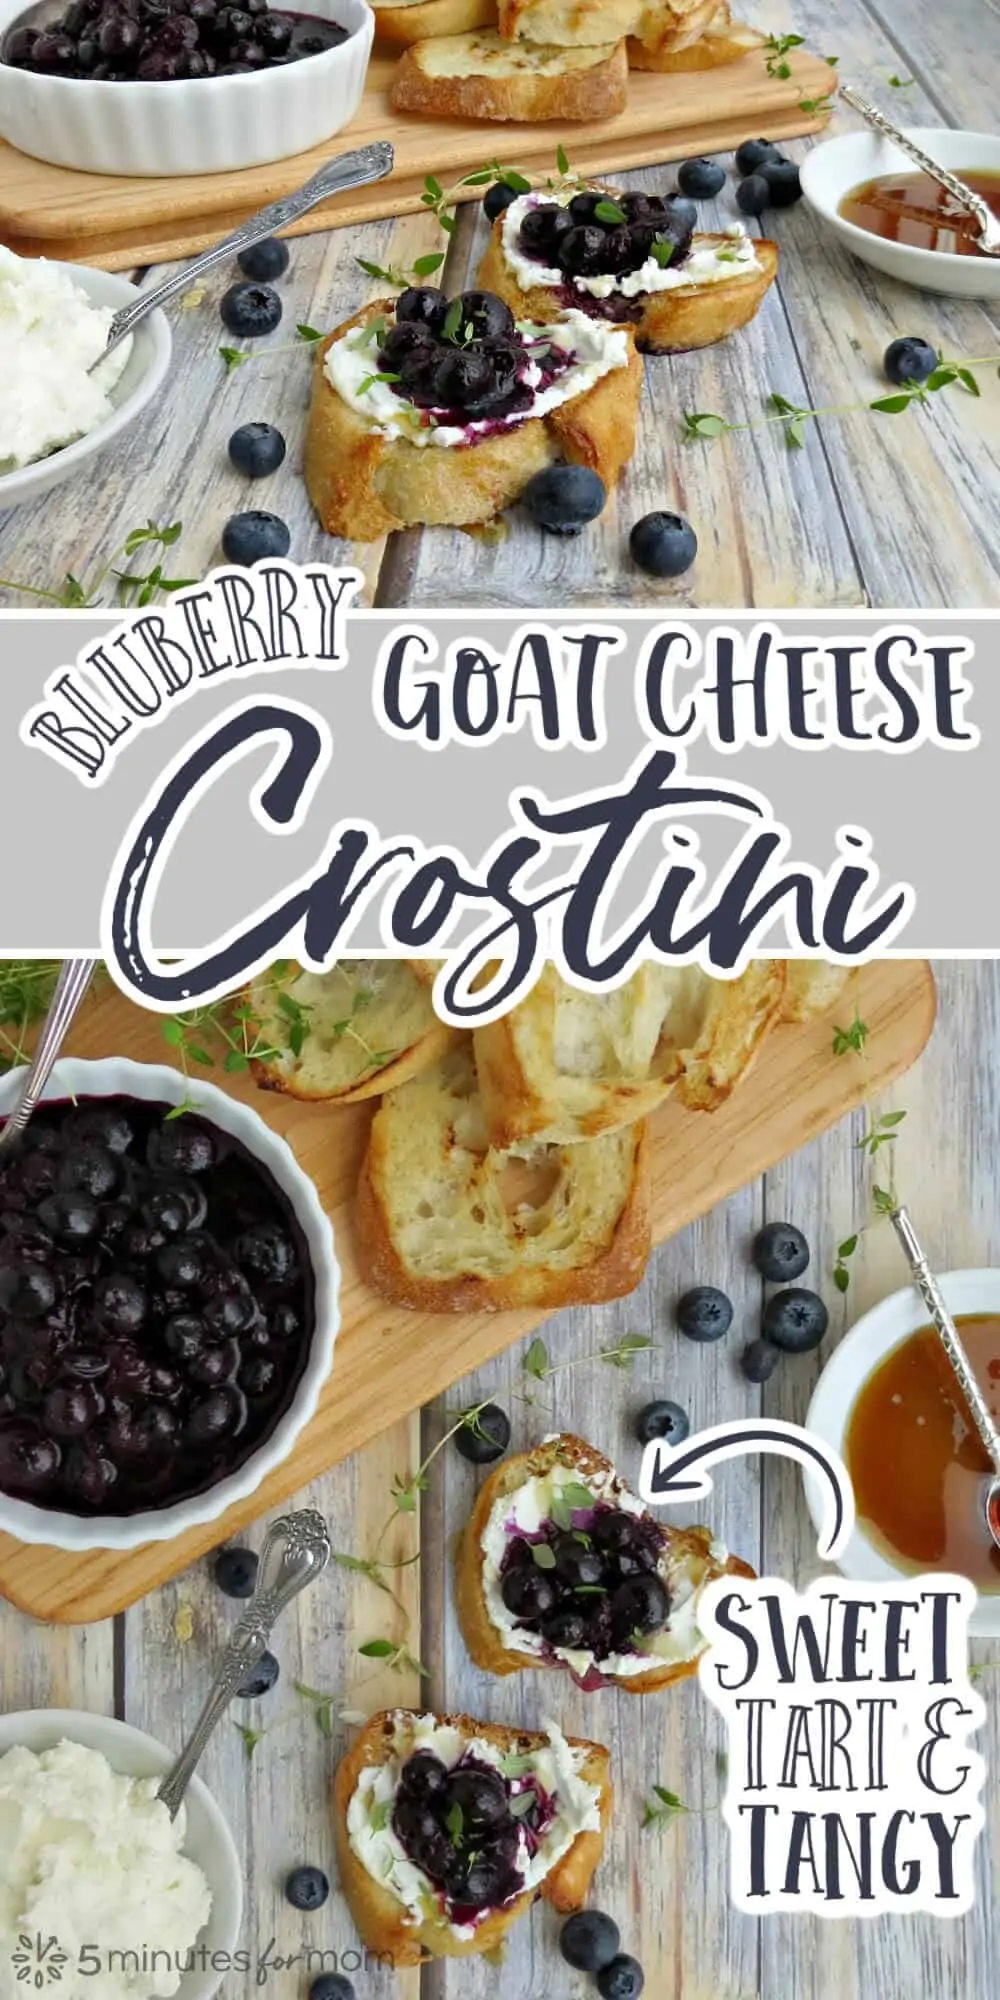 Two photos, the first with a side angle and the second from overhead, showing two slices of crostini topped with goat cheese and blueberry sauce. Sitting on the table next to the two slices of crostini are a bread board with extra slices of toasted baguette and a bowl of blueberry sauce. Also on the table, sits a bowl of goat cheese, a bowl of honey, extra fresh blueberries and sprigs of fresh thyme. Text overlay says Blueberry Goat Cheese Crostini - Sweet, Tart & Tangy.